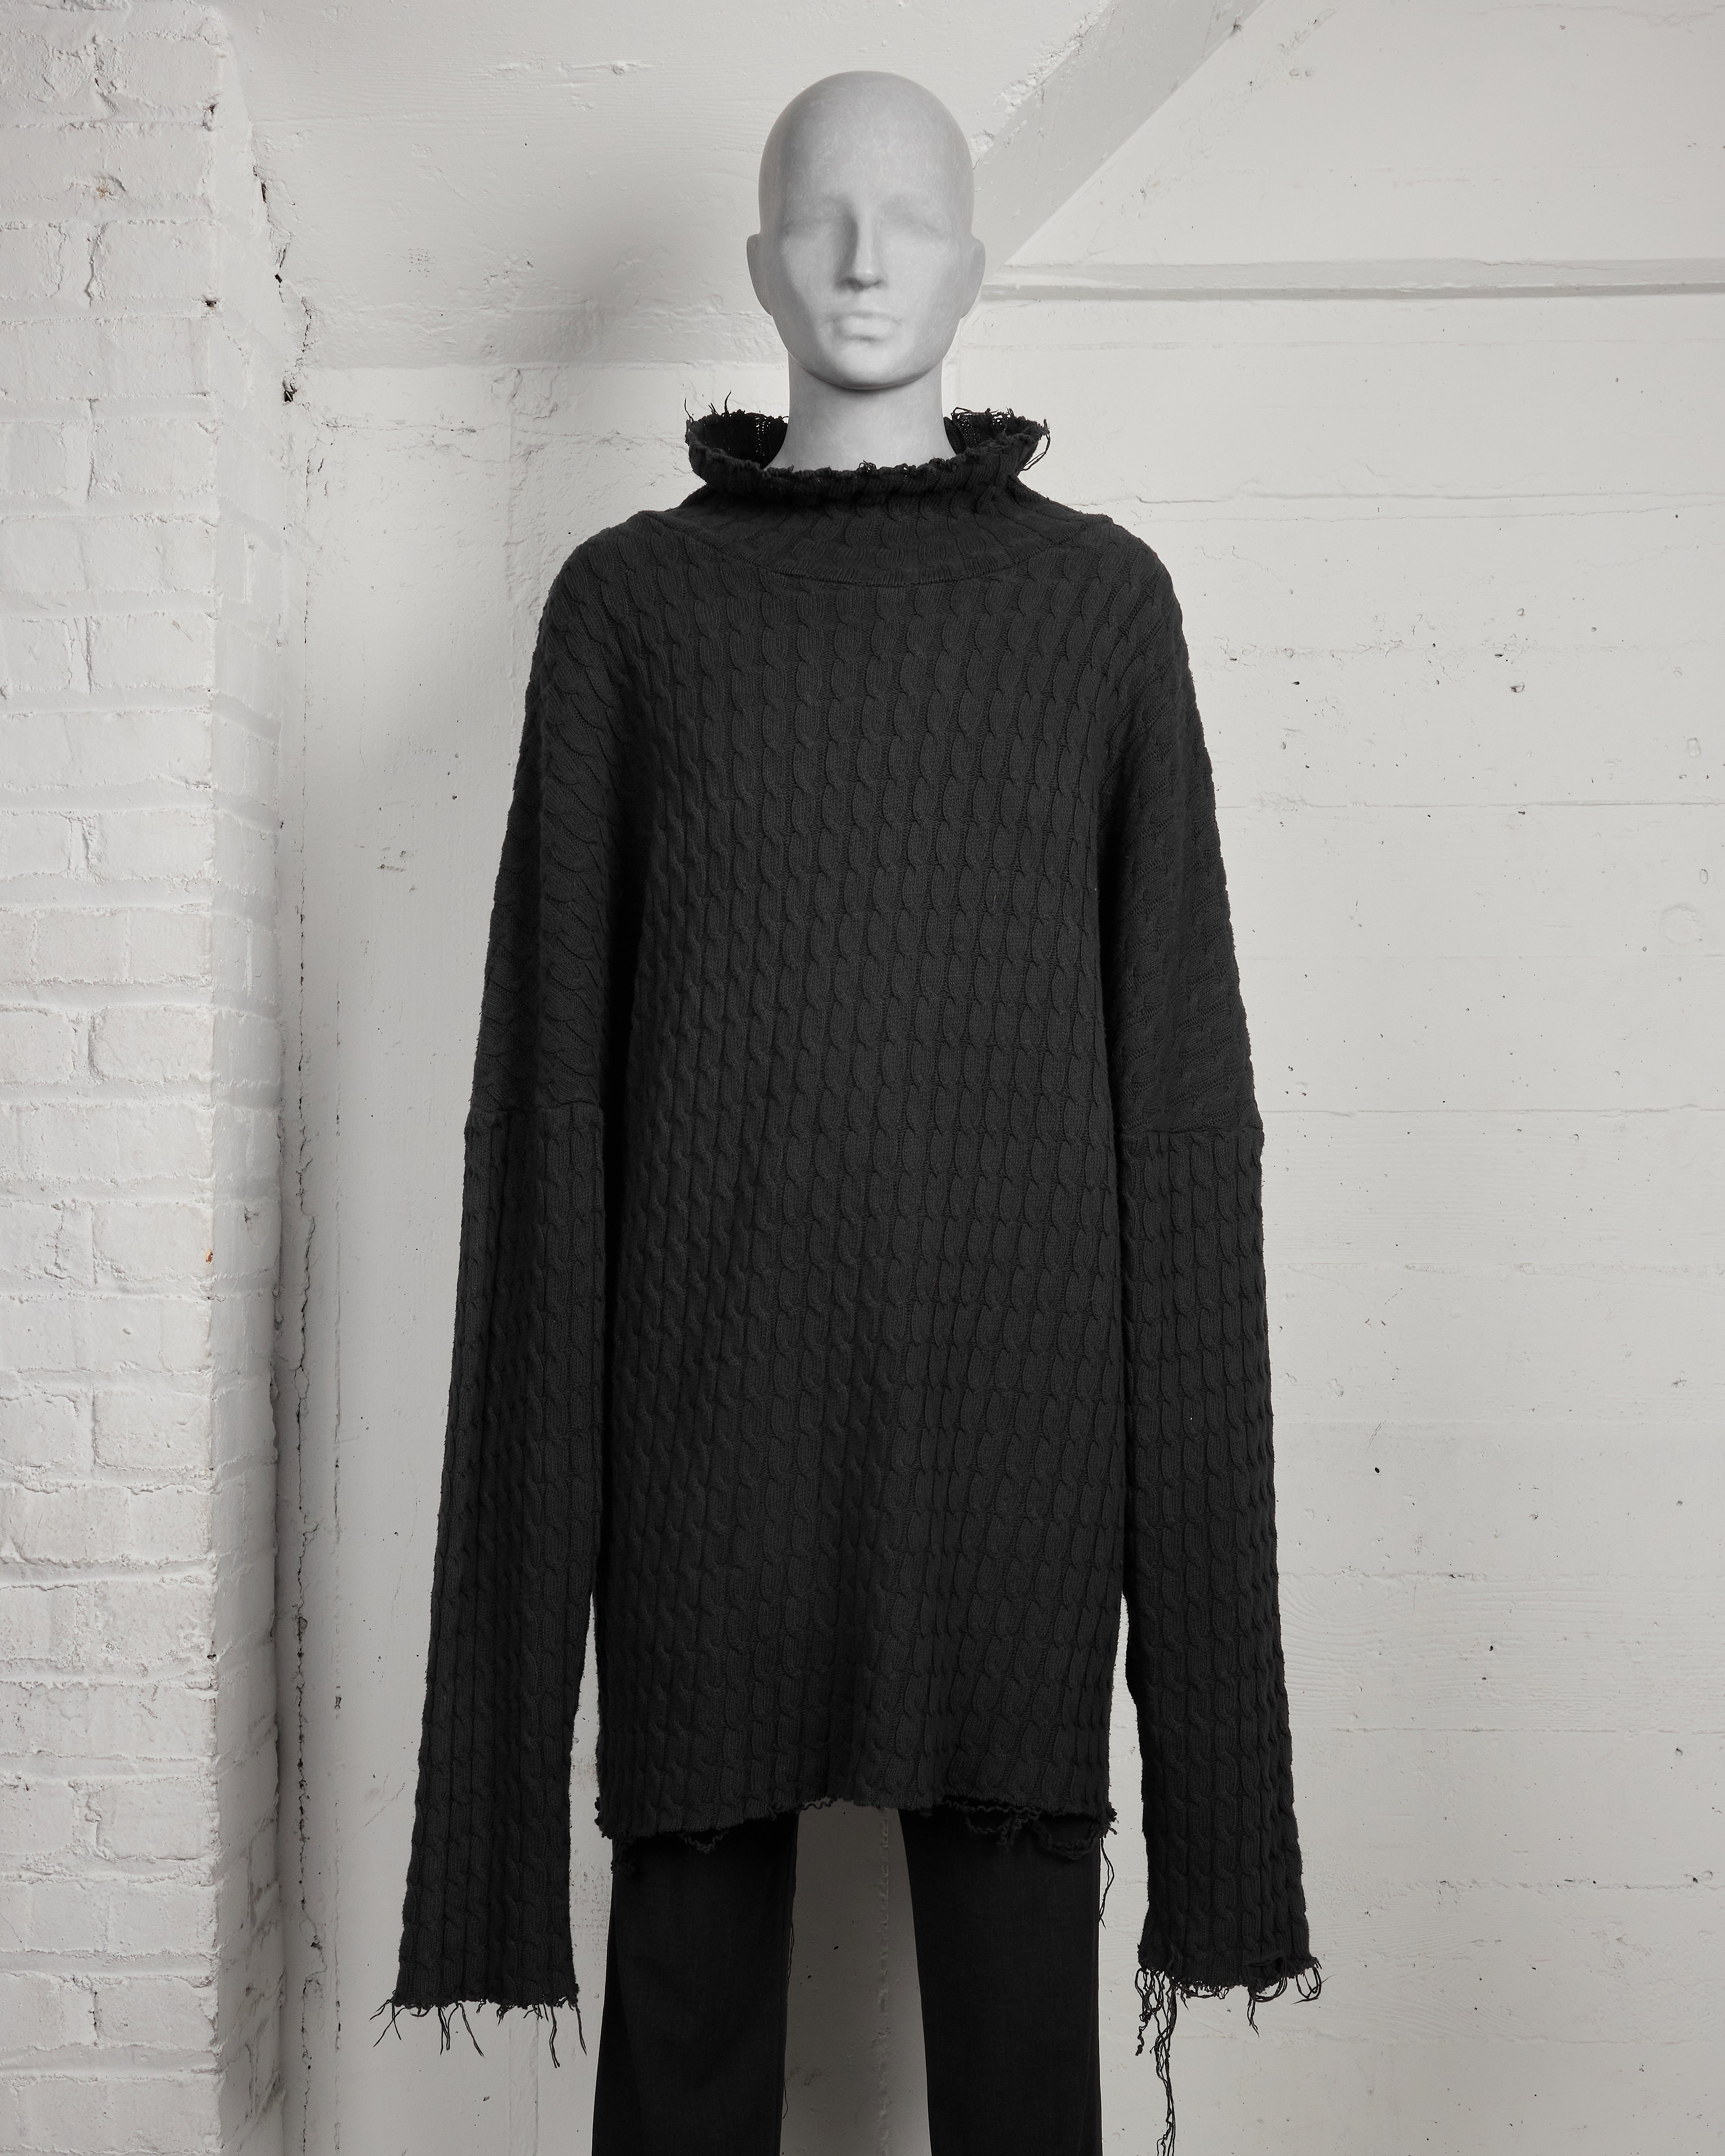 Raf Simons Oversized Cable-Knit Sweater- AW02 “Virginia Creeper”